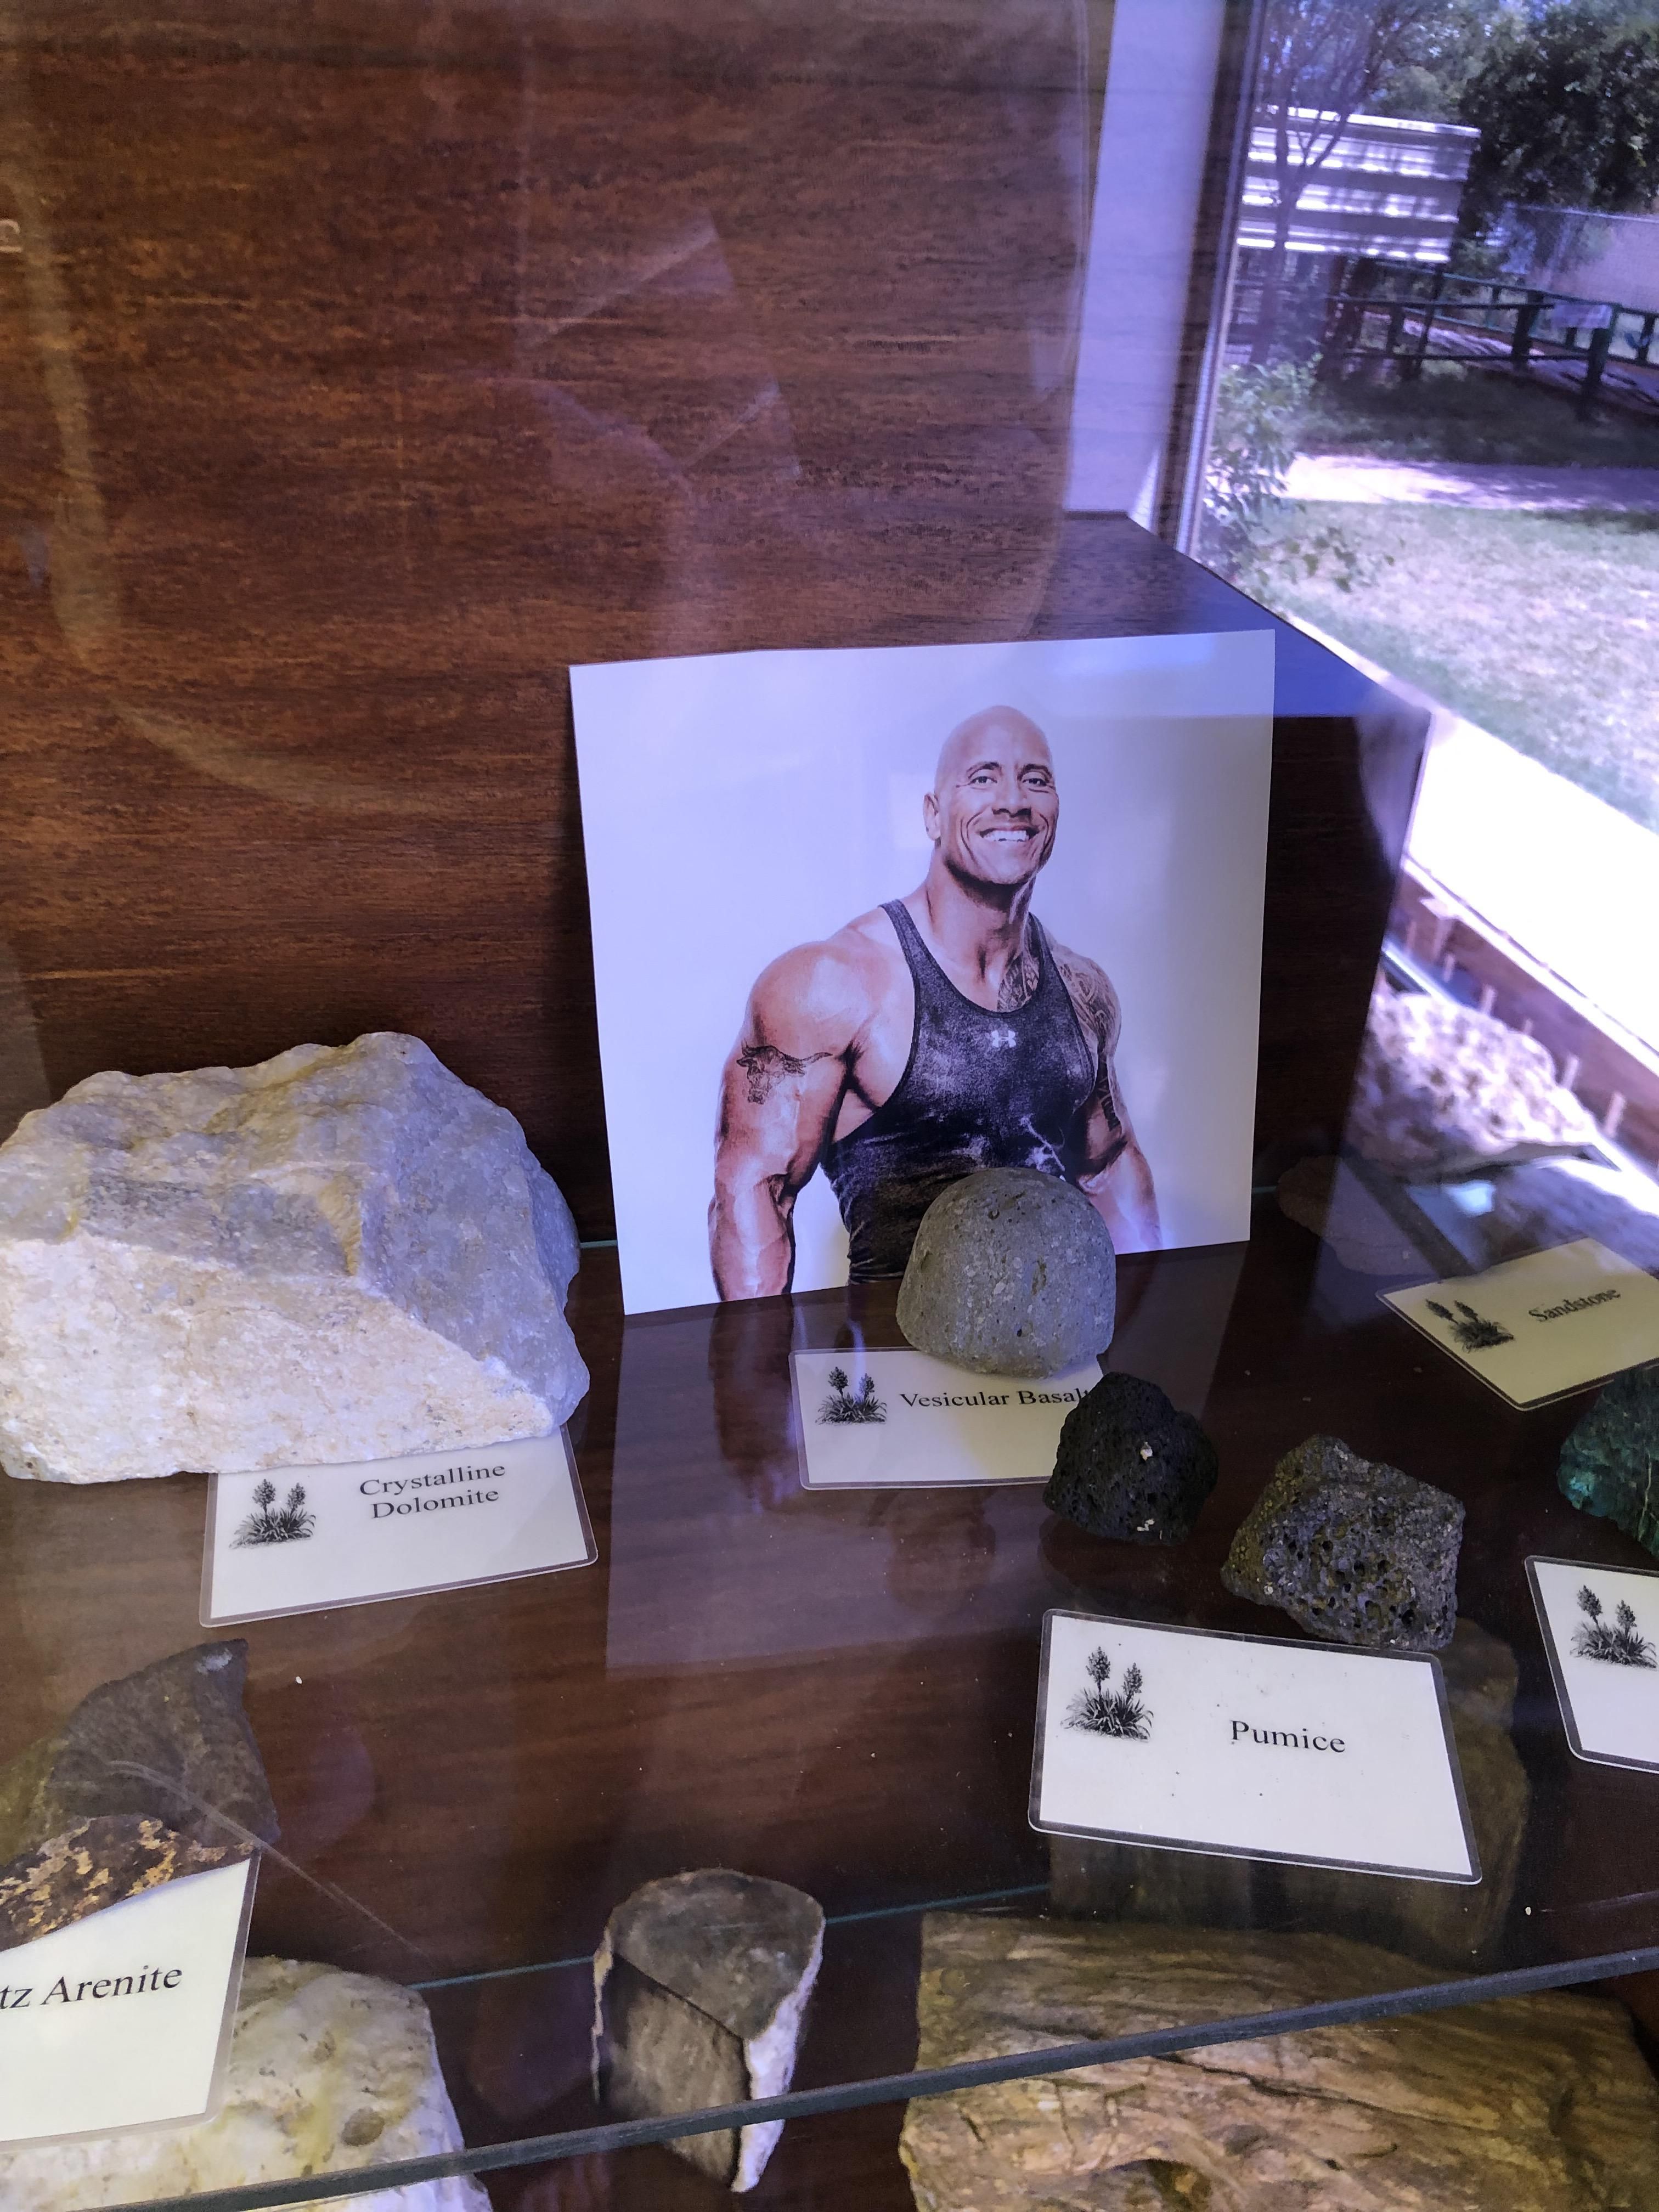 There's a photo of Dwayne Johnson in the rock section of this nature center I was in.